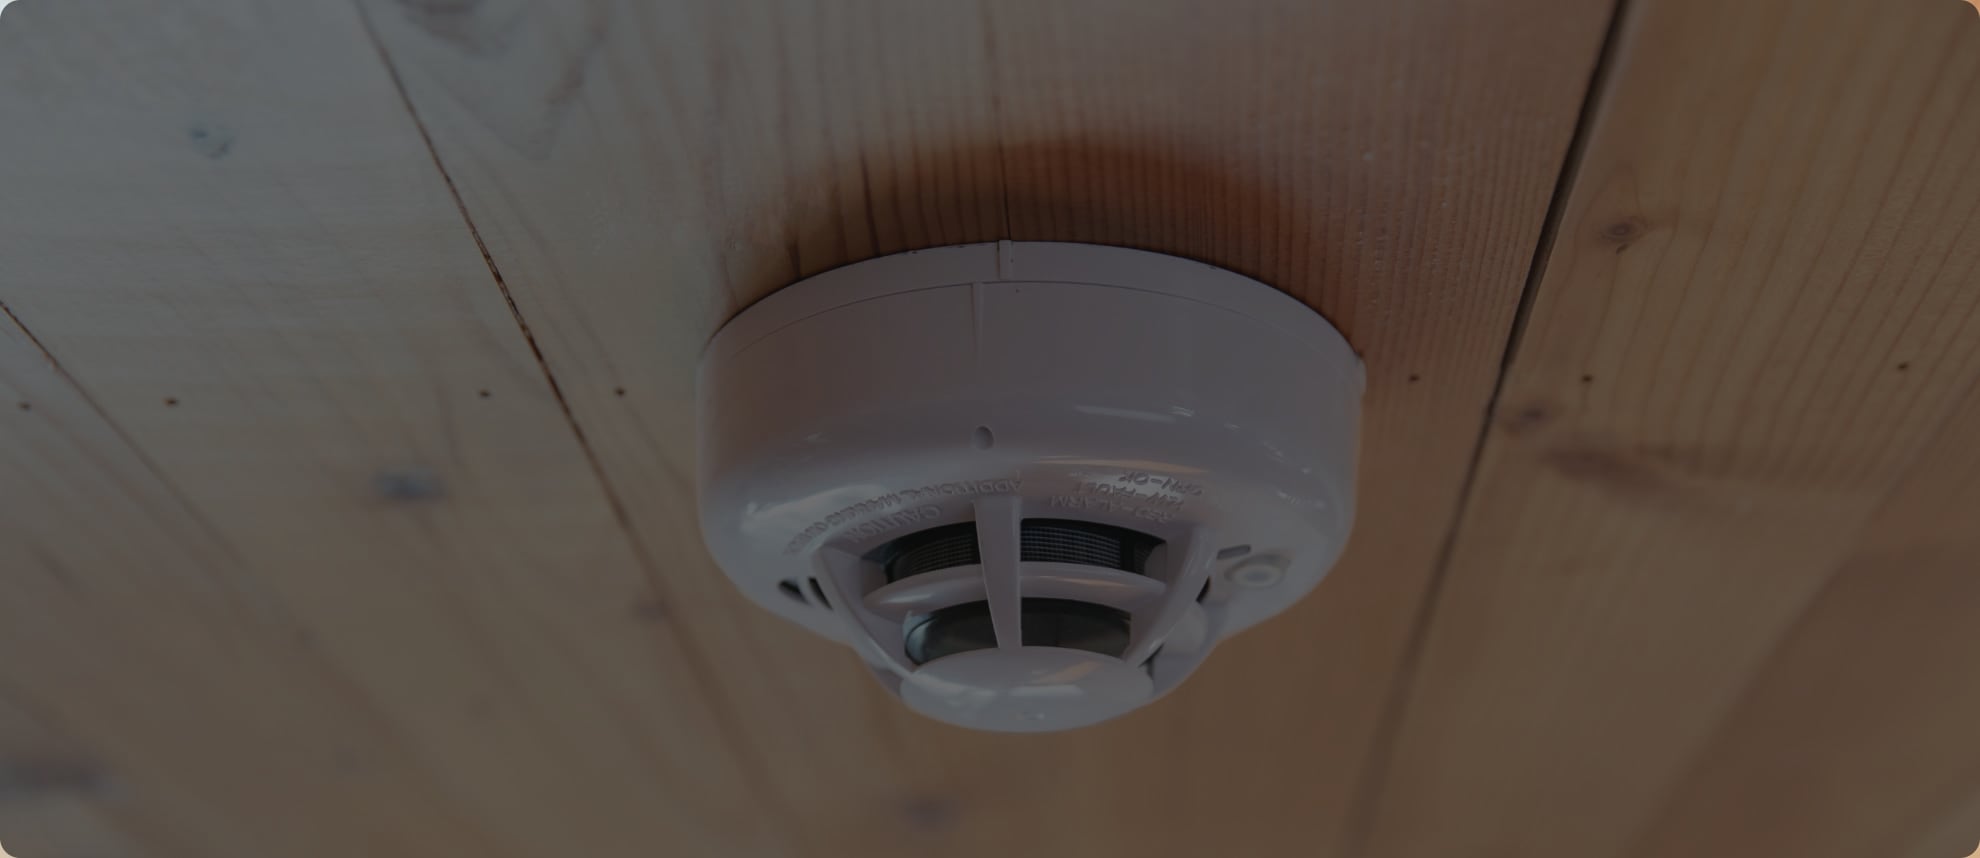 Vivint Monitored Smoke Alarm in Beaumont